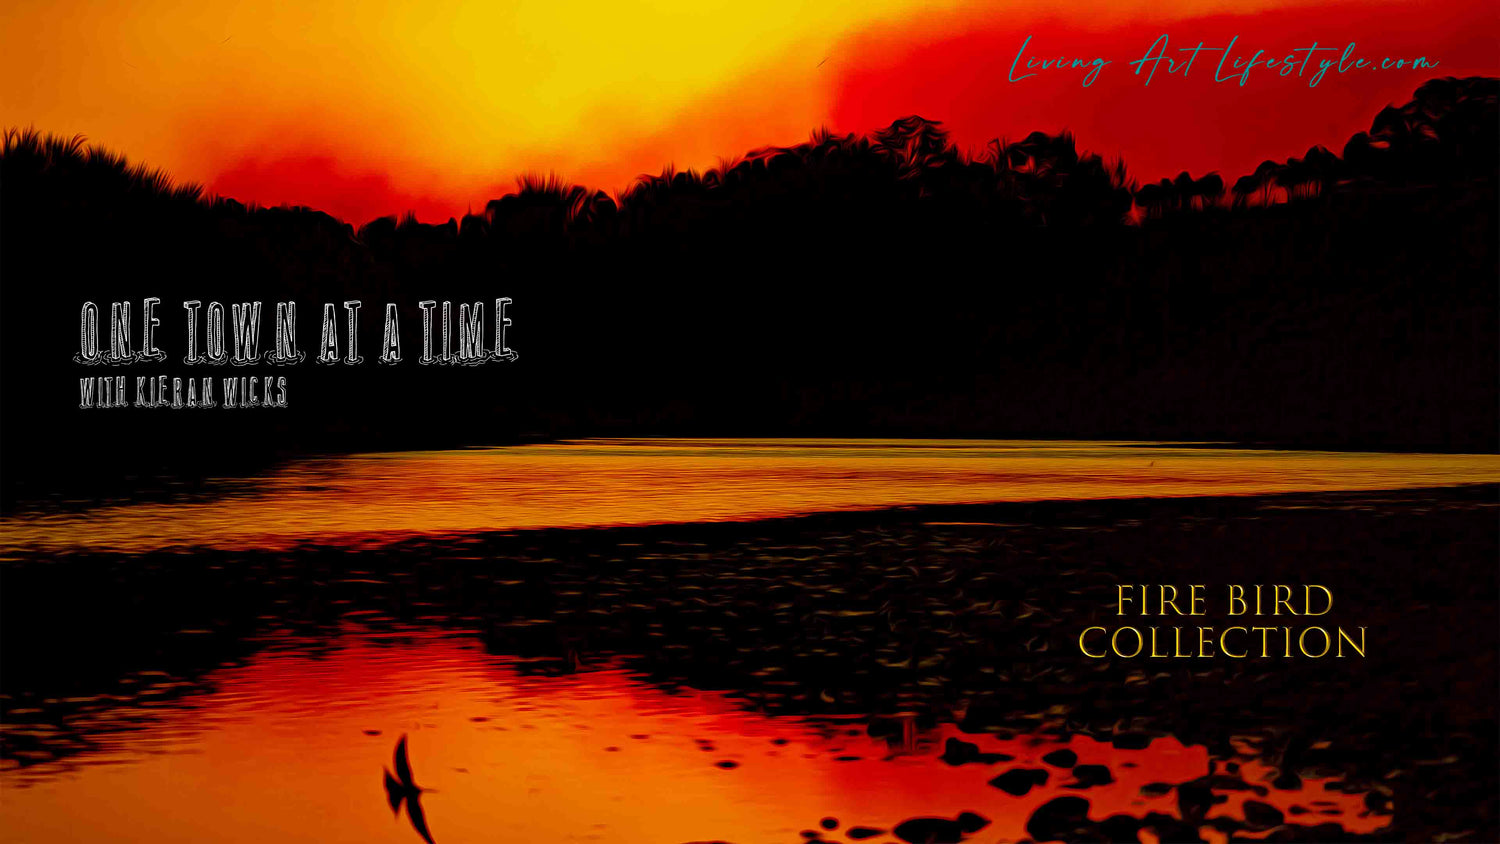 FIRE BIRD COLLECTION - LIVING ART LIFESTYLE - COPMANHURST CAMPGROUND NORTHERN RIVERS NEW SOUTH WALES SUNSET ON THE CLARENCE RIVER WITH BIRD IN FLIGHT ABOVE WATER